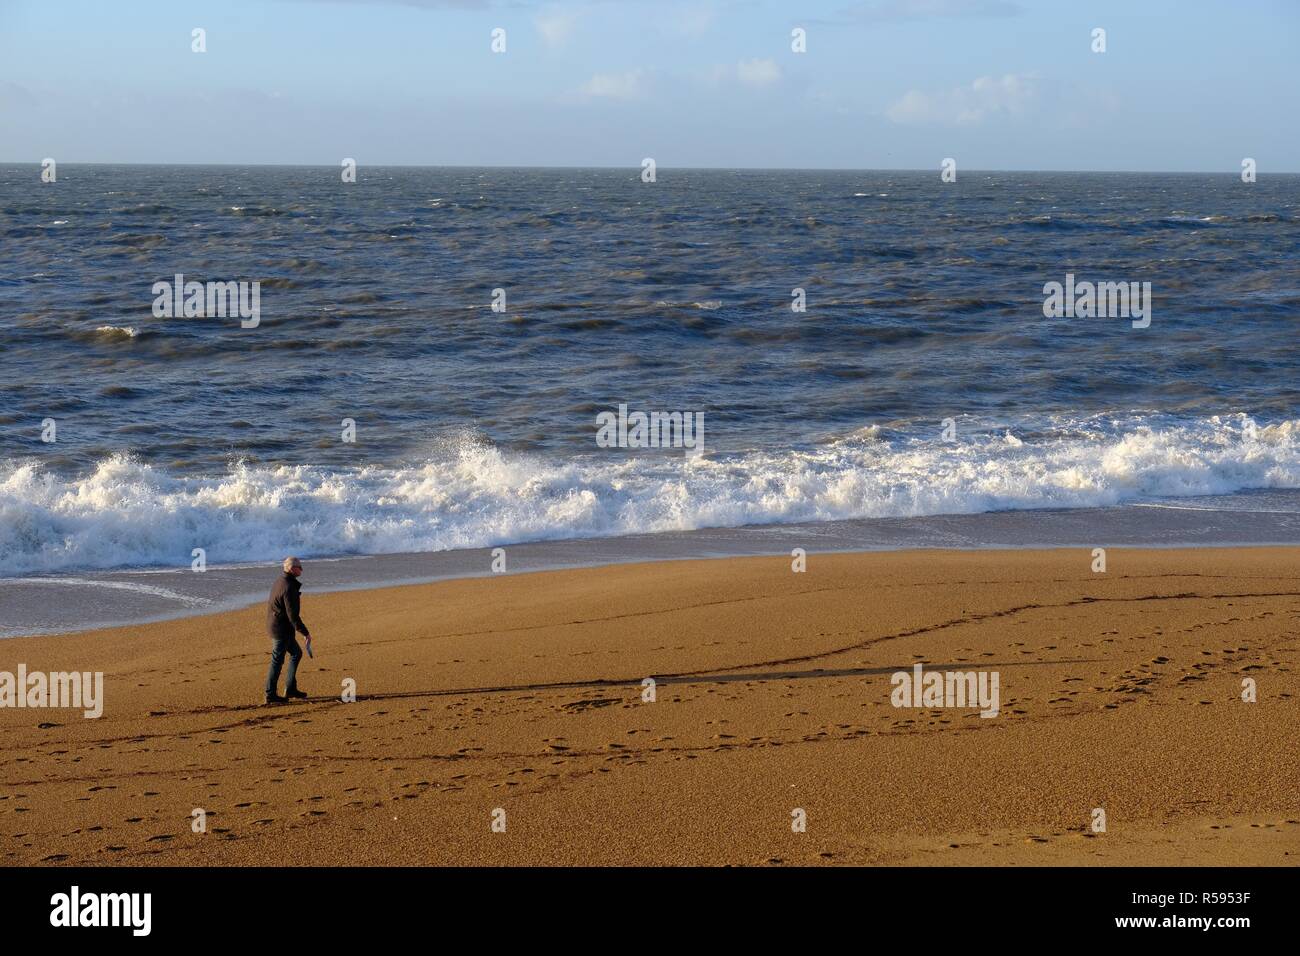 West Bay, Dorset, UK. 30 November 2018. After two days of storms fishermen enjoy the good weather as sunshine returns to West Bay on the Dorset coast Credit: Tom Corban/Alamy Live News Stock Photo